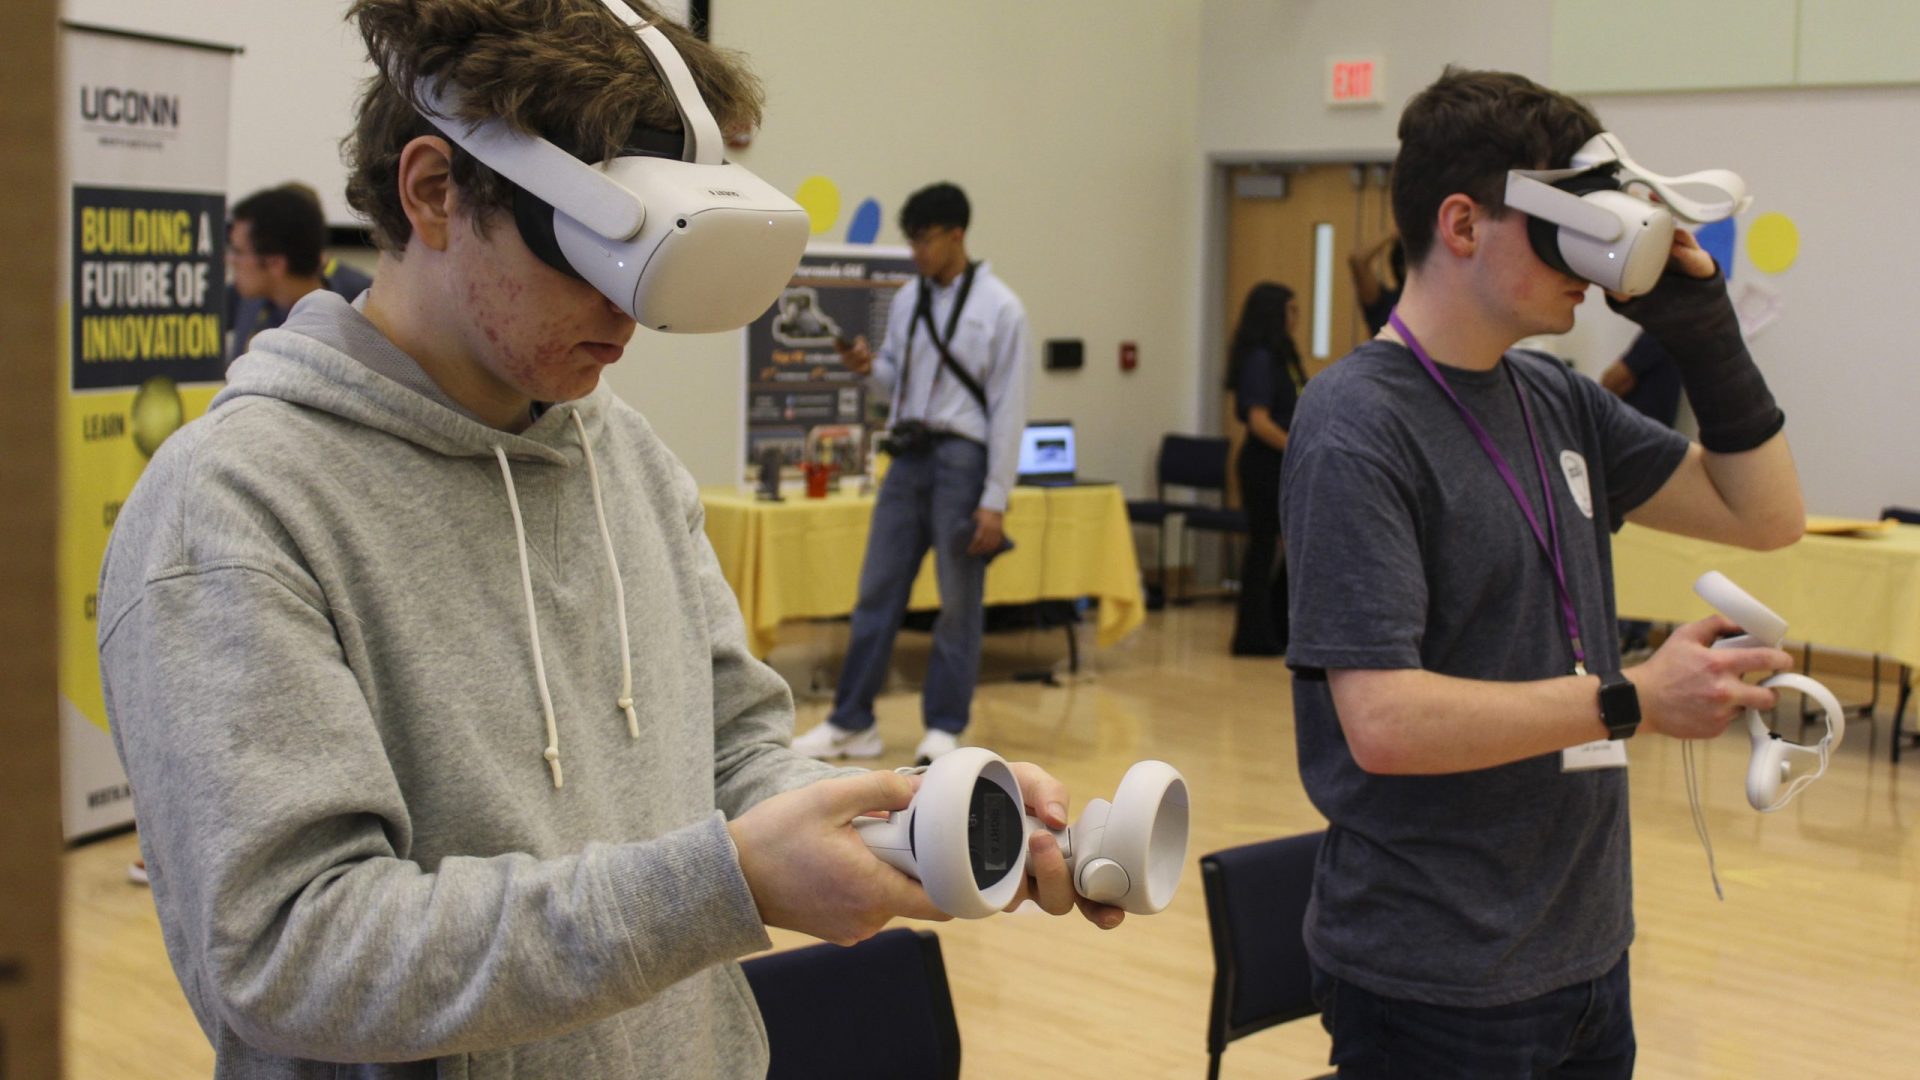 Students Playing with VR Headset